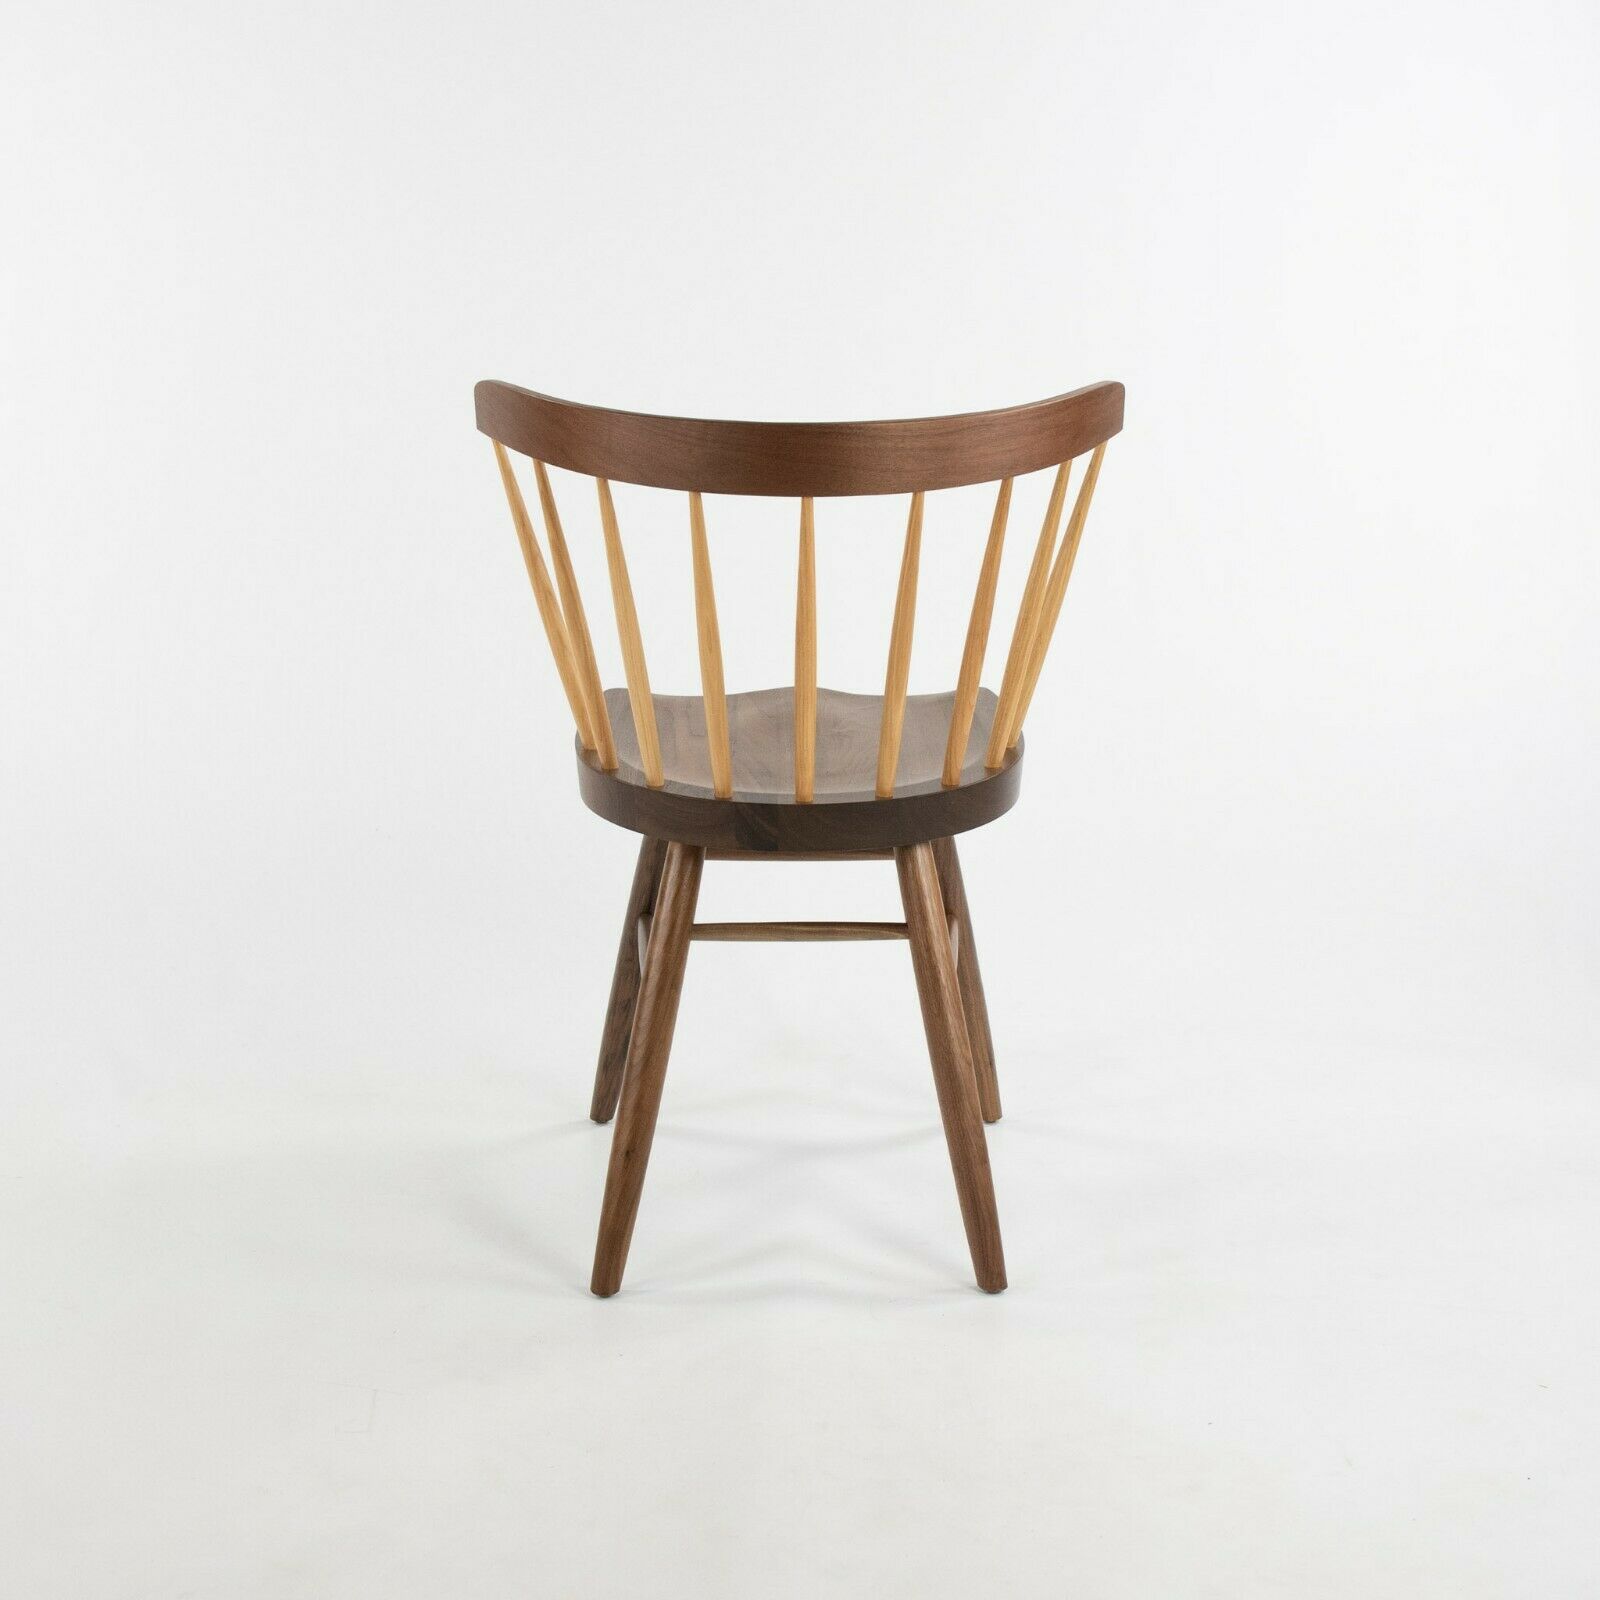 SOLD 2021 George Nakashima for Knoll Straight Dining Chair Walnut w/ Hickory Spindles